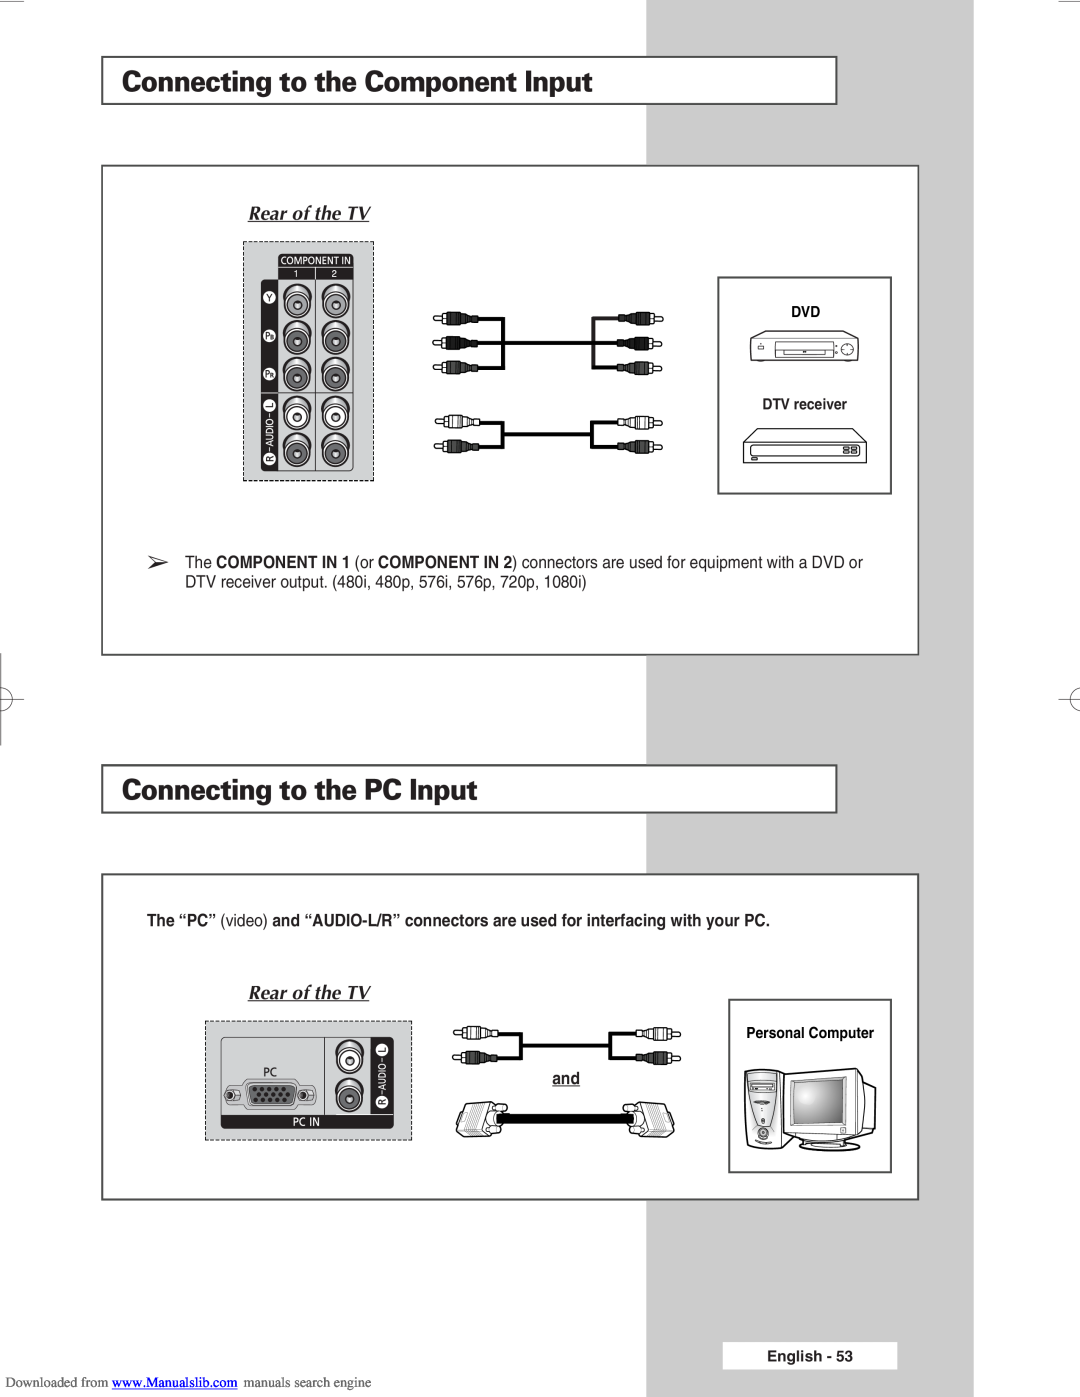 Samsung SP67L6HX manual Connecting to the Component Input, Connecting to the PC Input, Rear of the TV, Personal Computer 